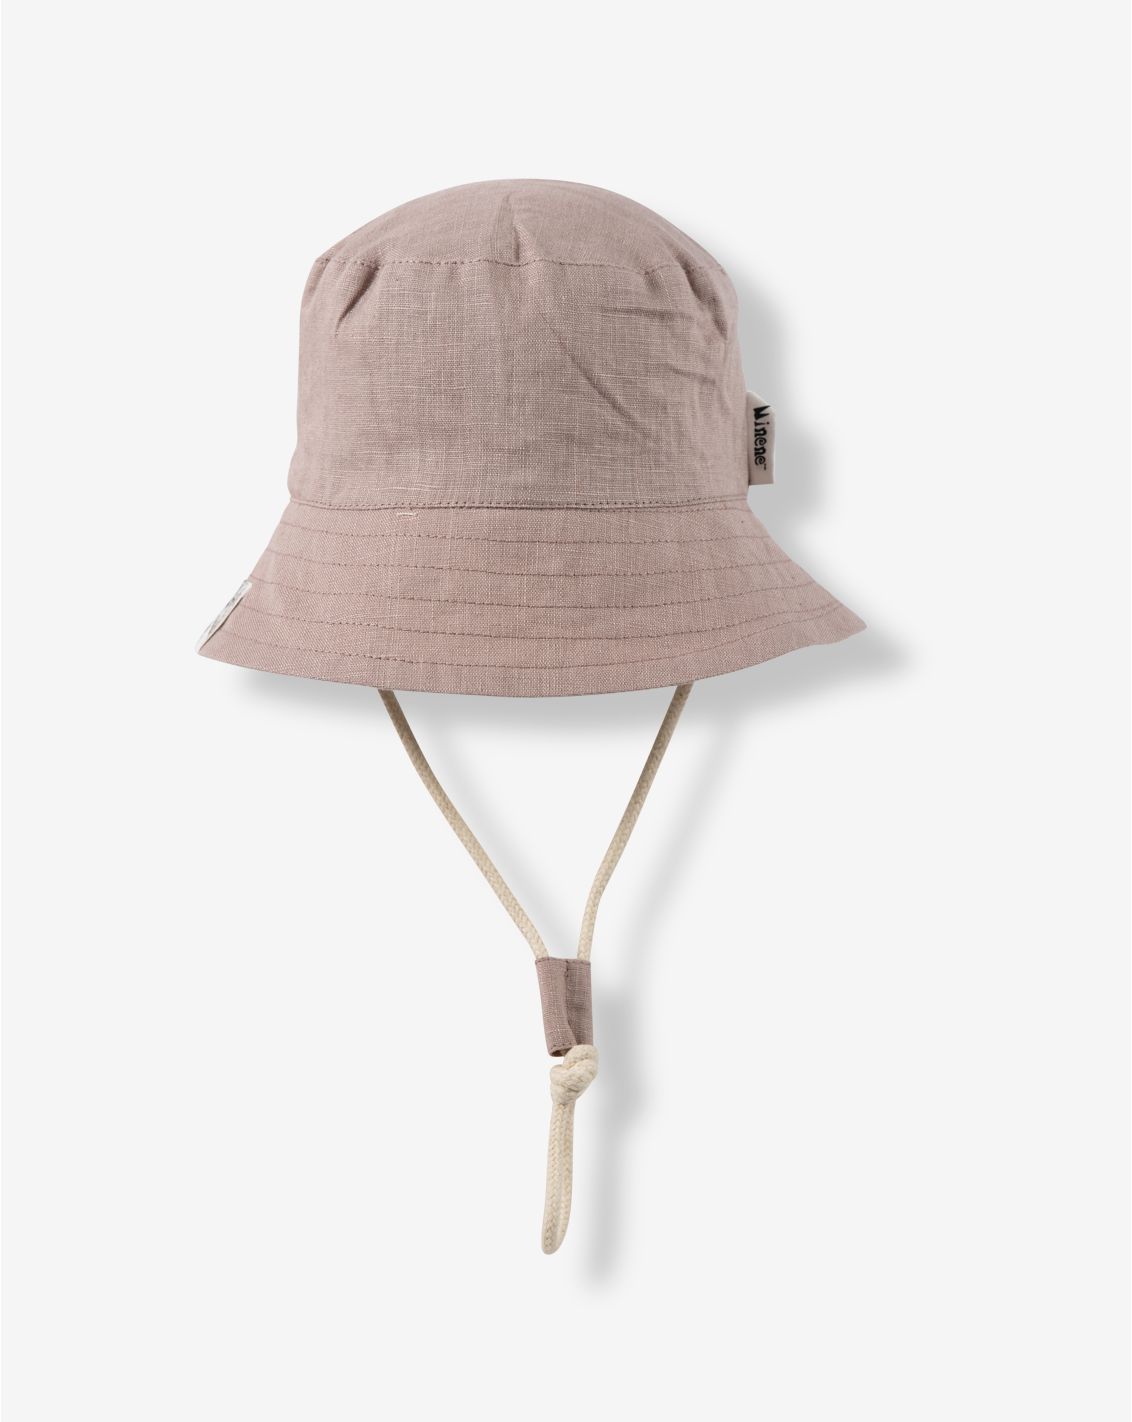 Summer Hat With Strap SH2, Lilly